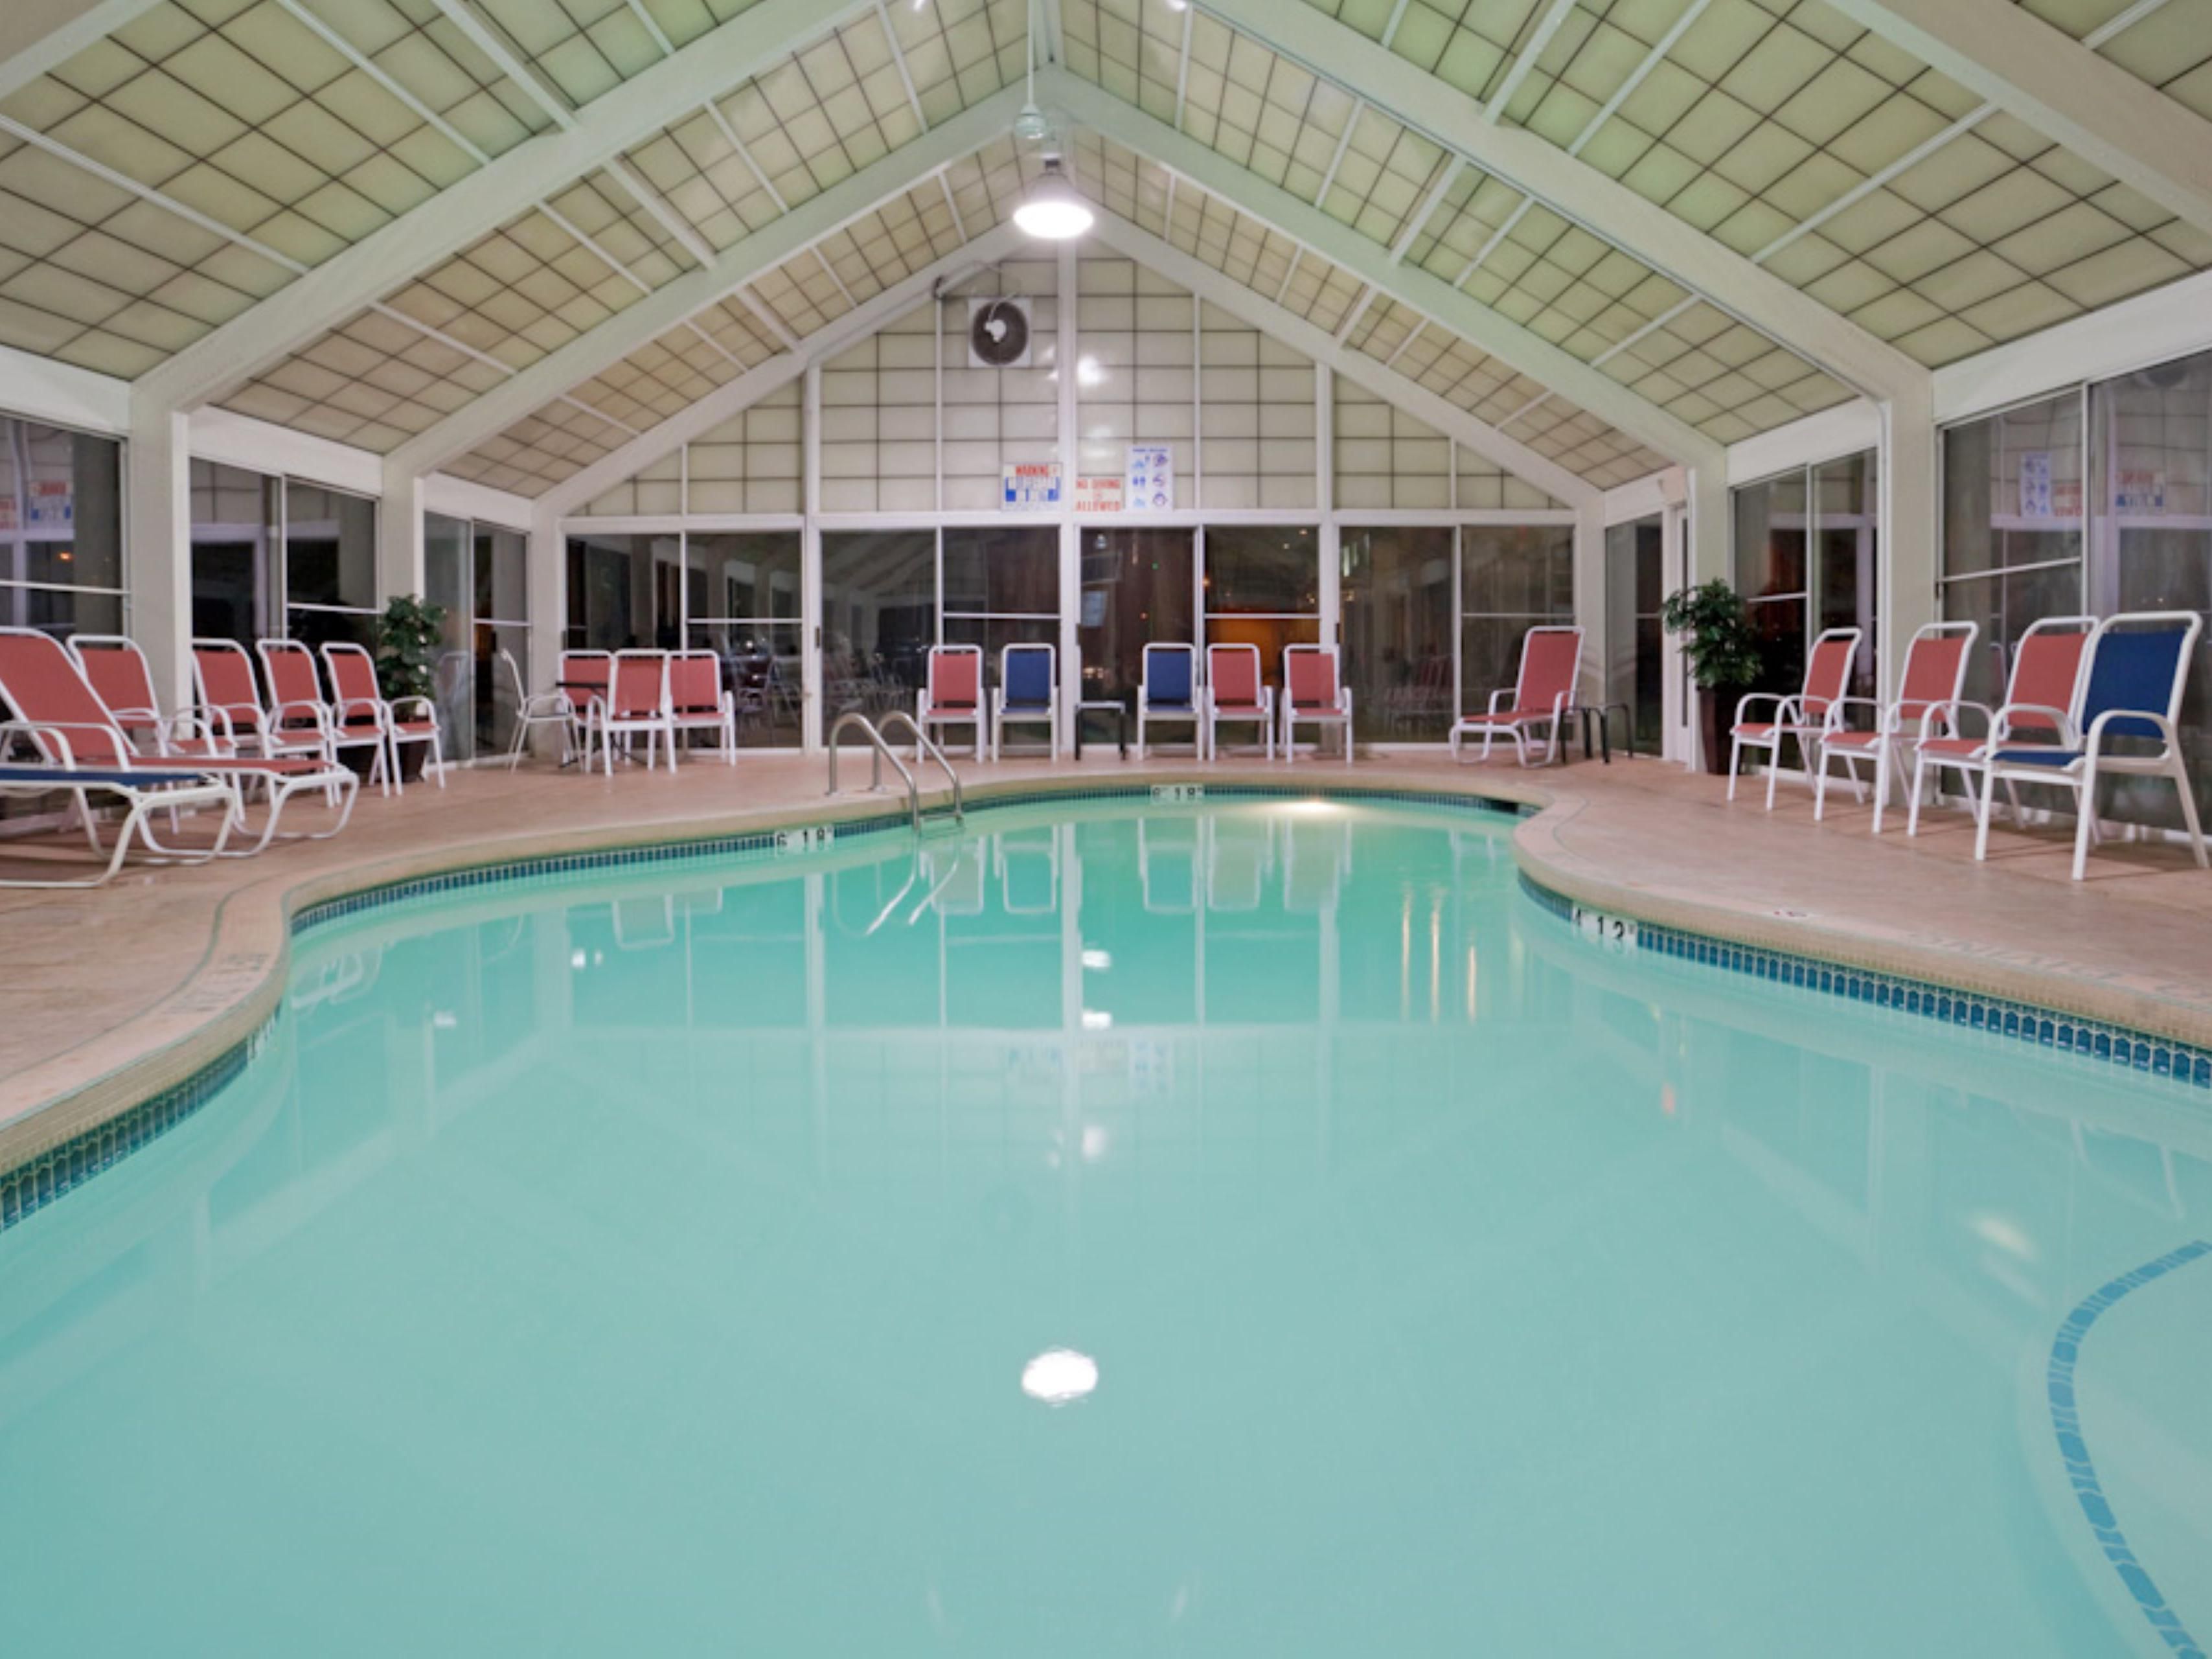 During your stay with us, enjoy our indoor heated pool.